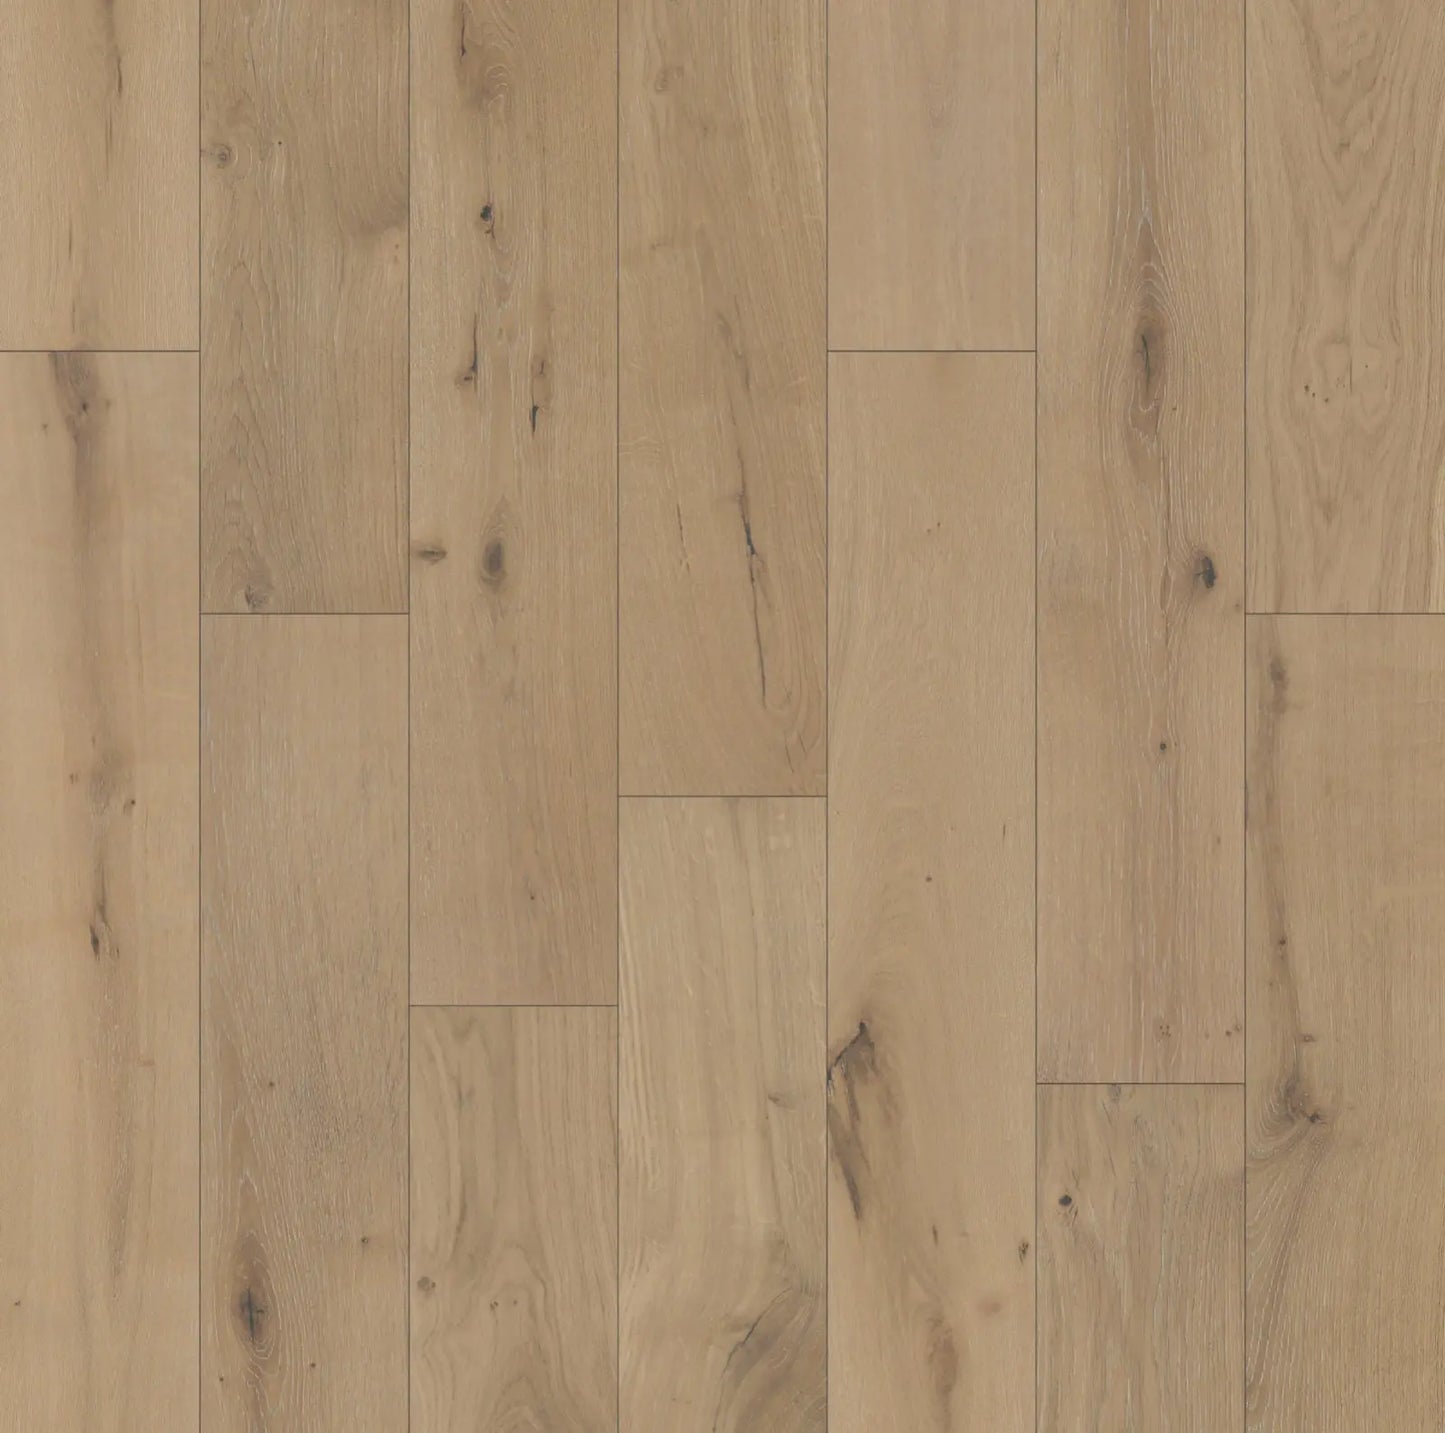 MSW66 Oak Iceberg 5/8 x 7-1/2" Wire Brushed Engineered- Call 844-356-6711 for BEST price! MW floors